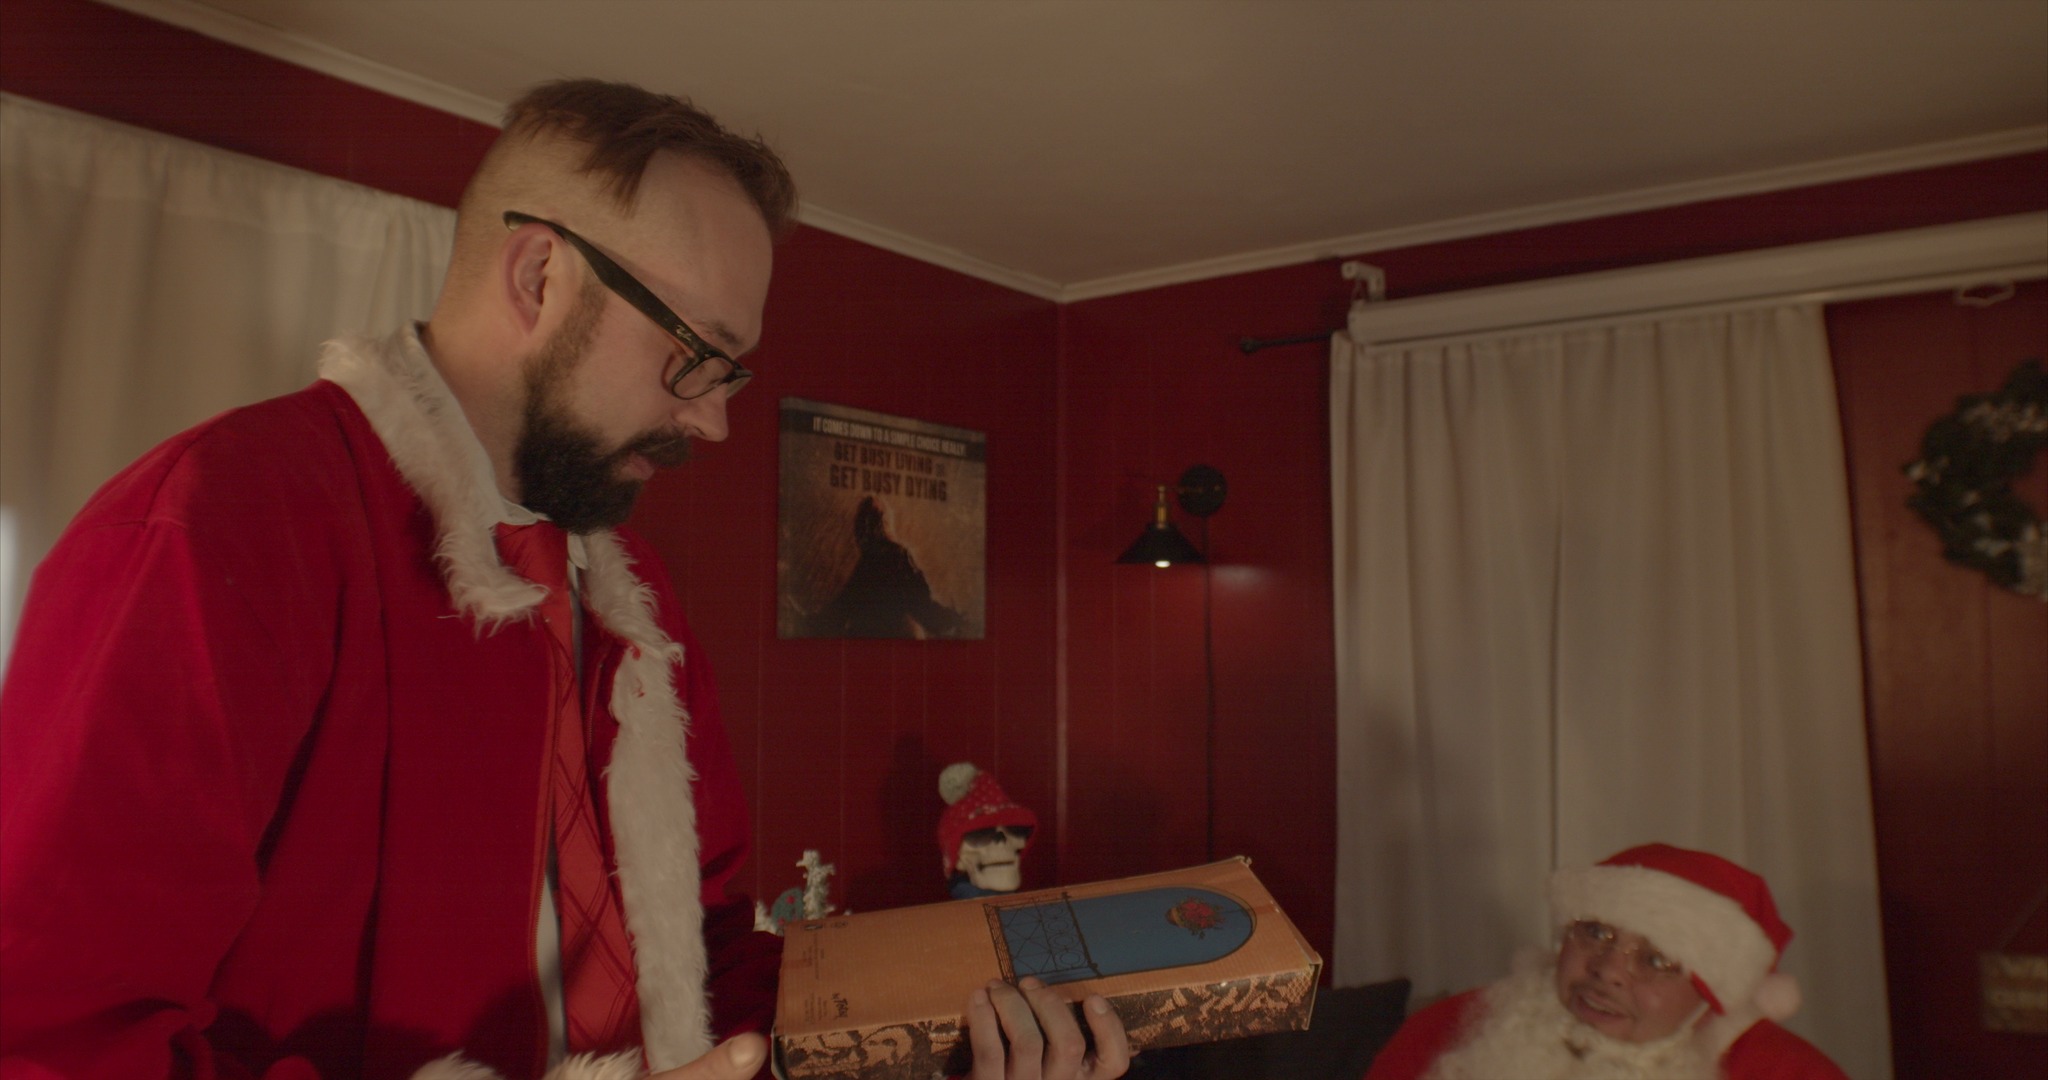 Holiday Comedy “A Christmas Invitation” Directed by Geno McGahee Releases on TUBI Streaming Platform